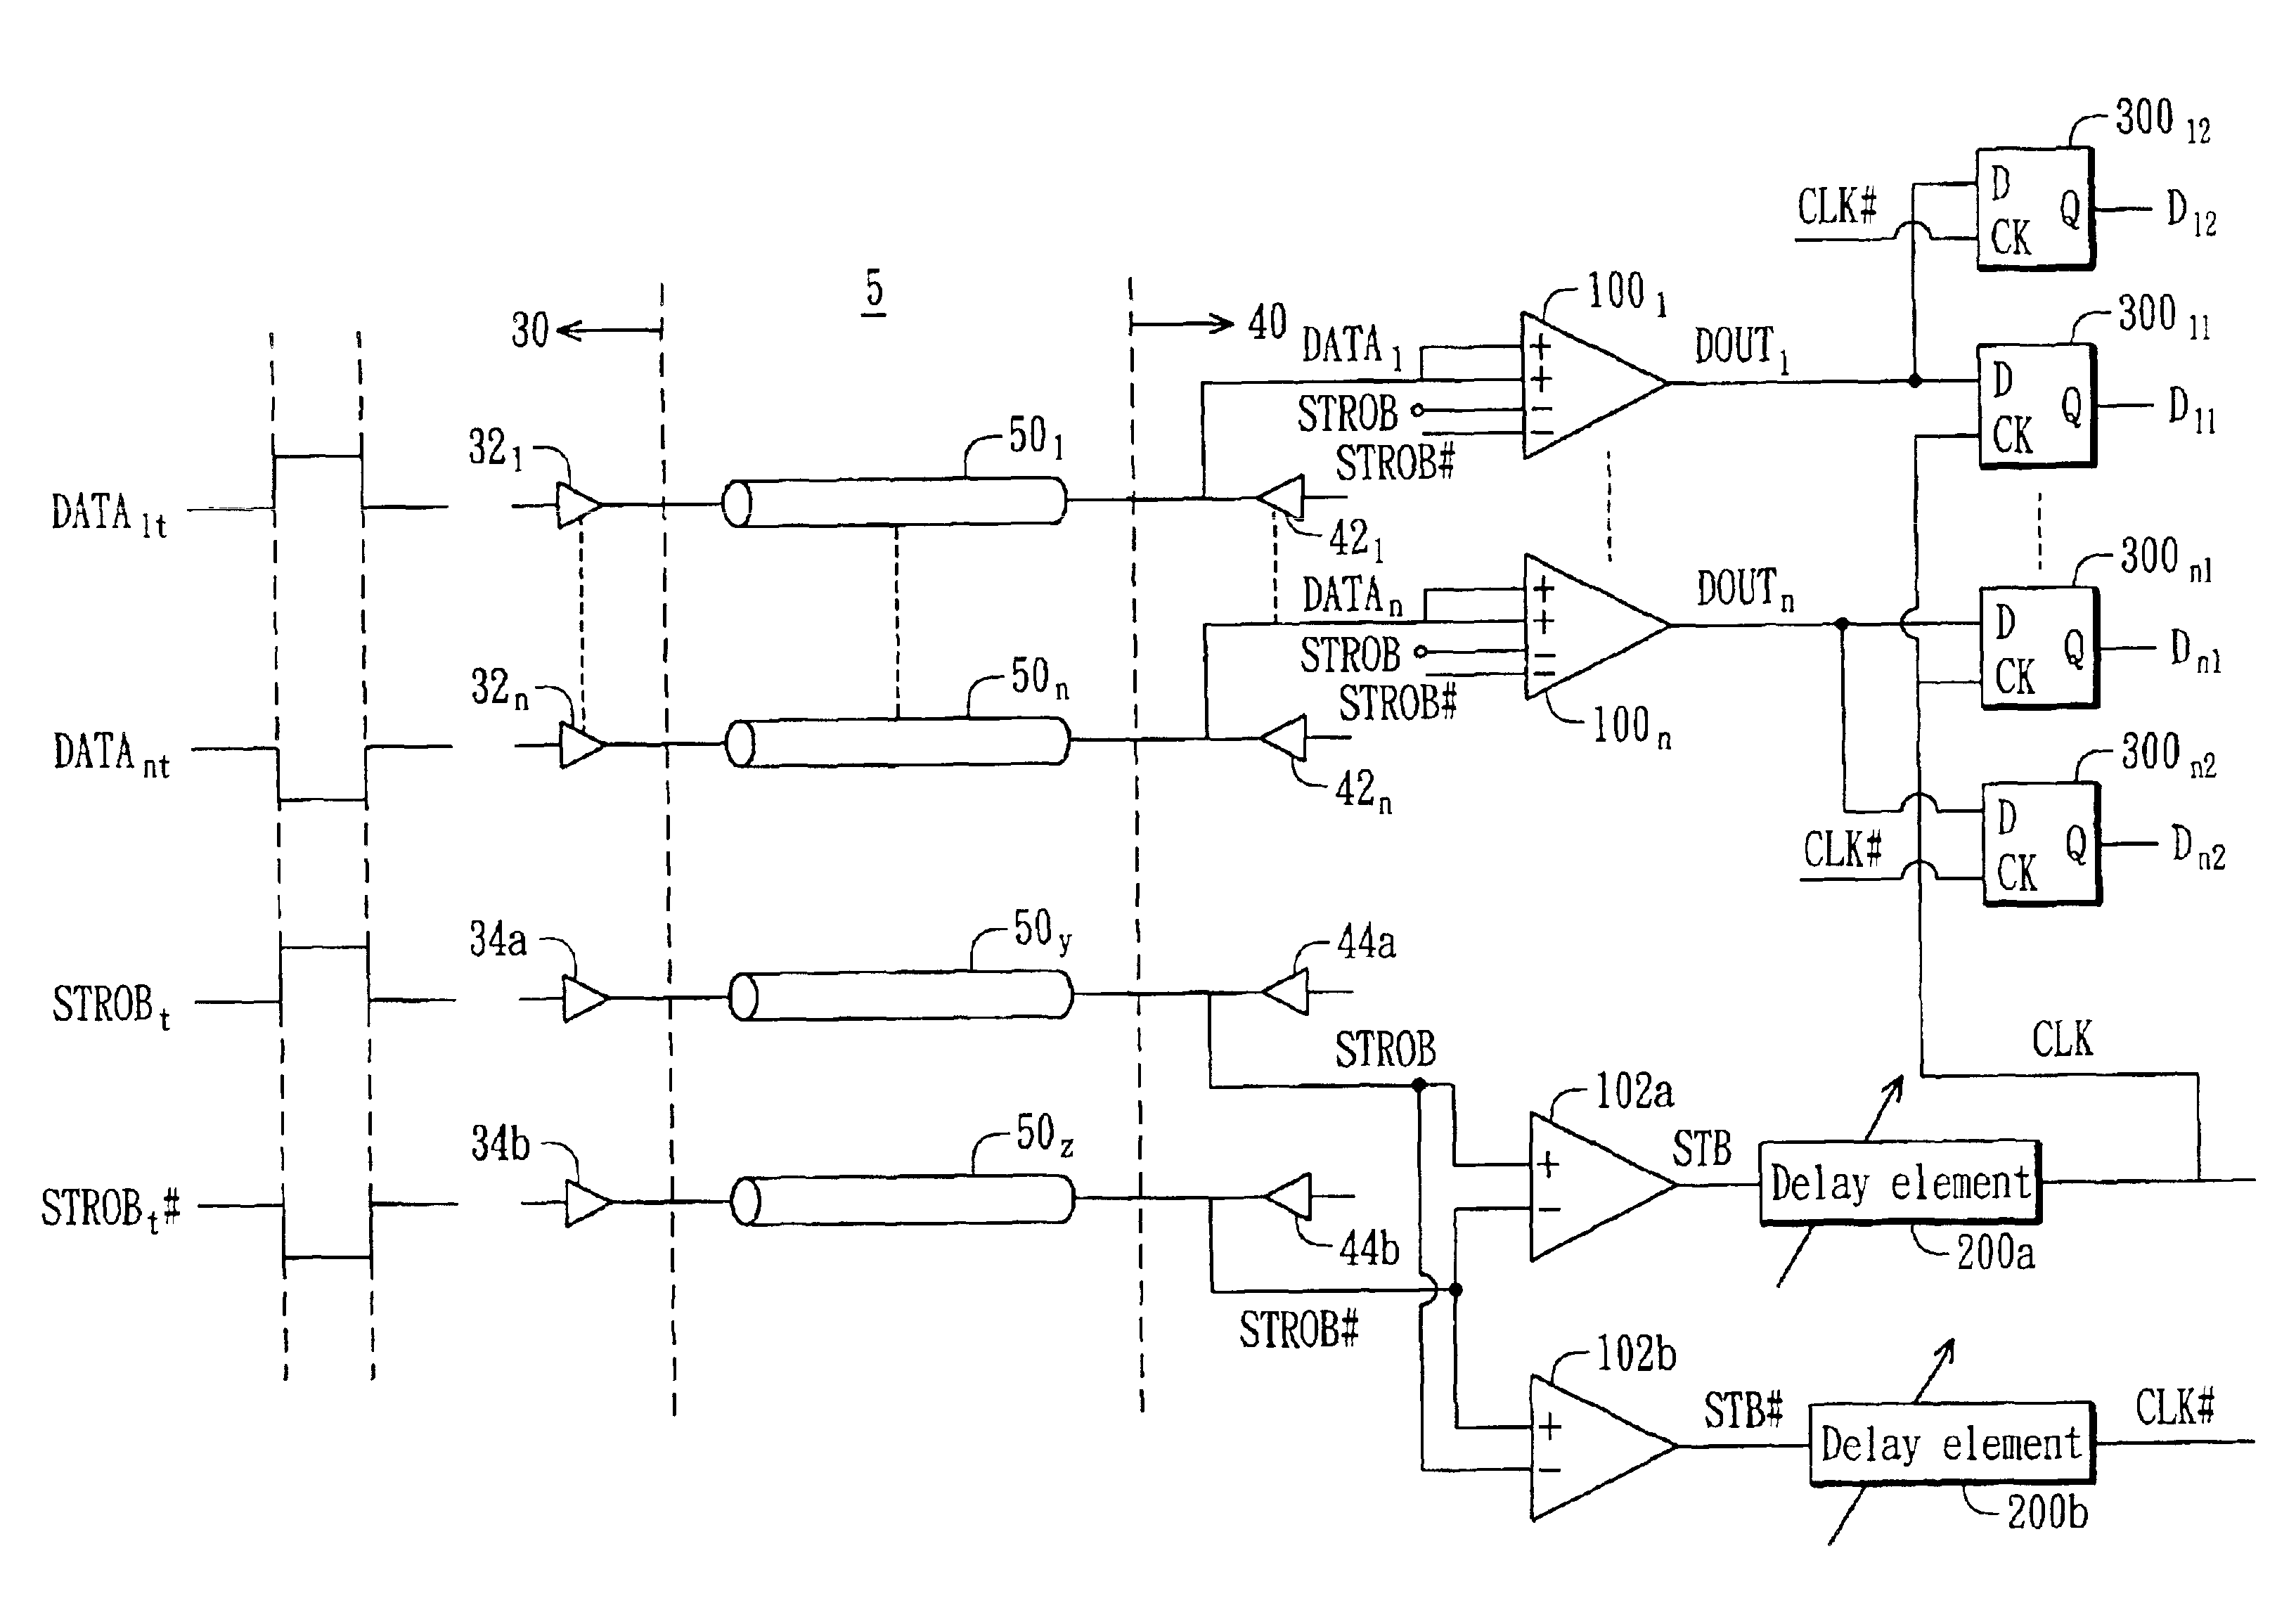 System for latching an output signal generated by comparing complimentary strobe signals and a data signal in response to a comparison of the complimentary strobe signals